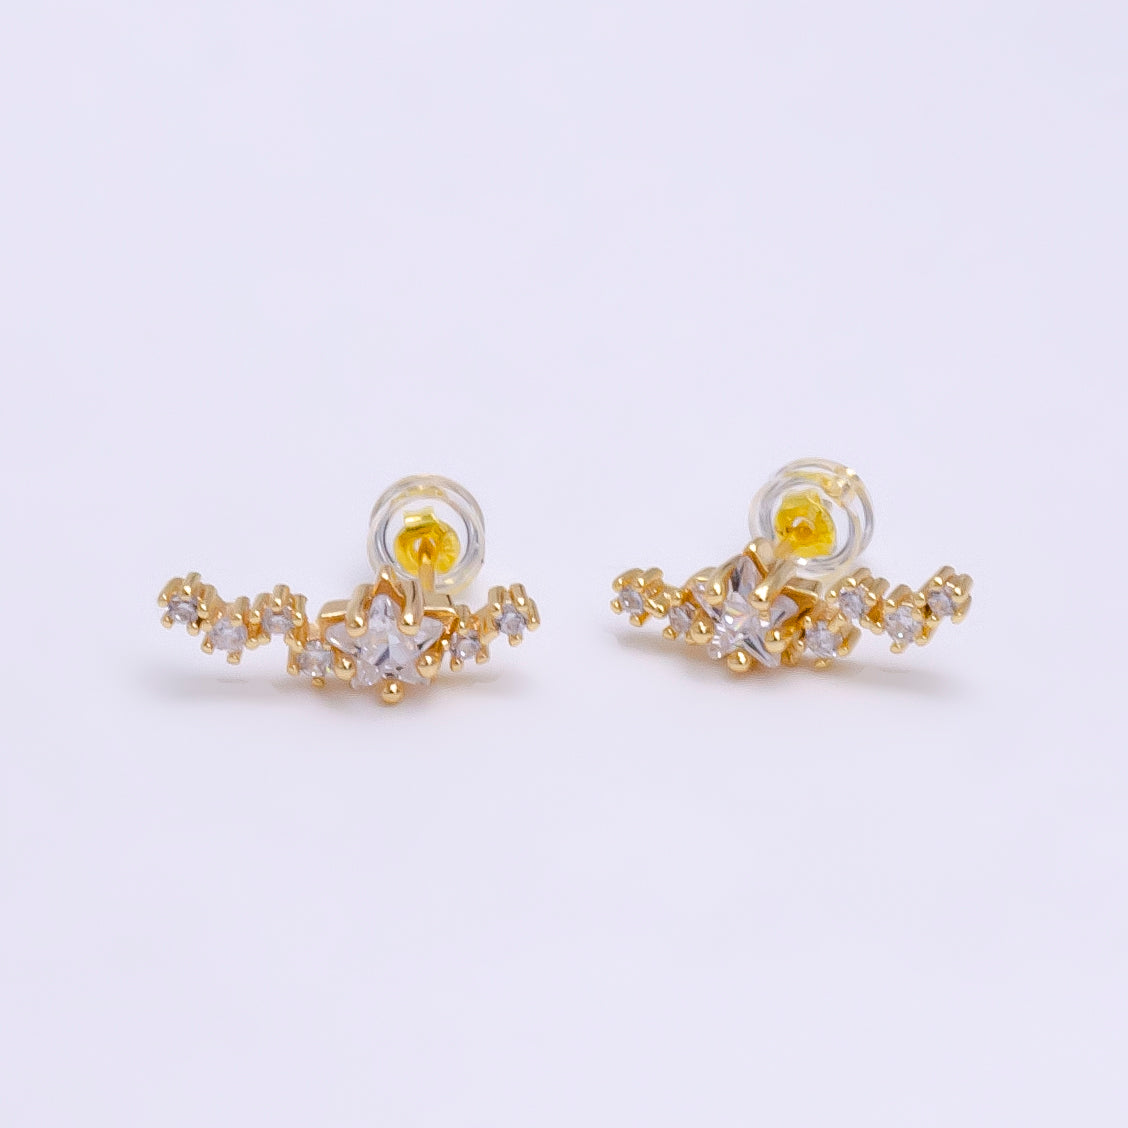 Single Star on Crystal Chain Studs Earring, CZ Stone on Daily Wear Formal/Casual Earring Jewelry V-080 V-081 - DLUXCA